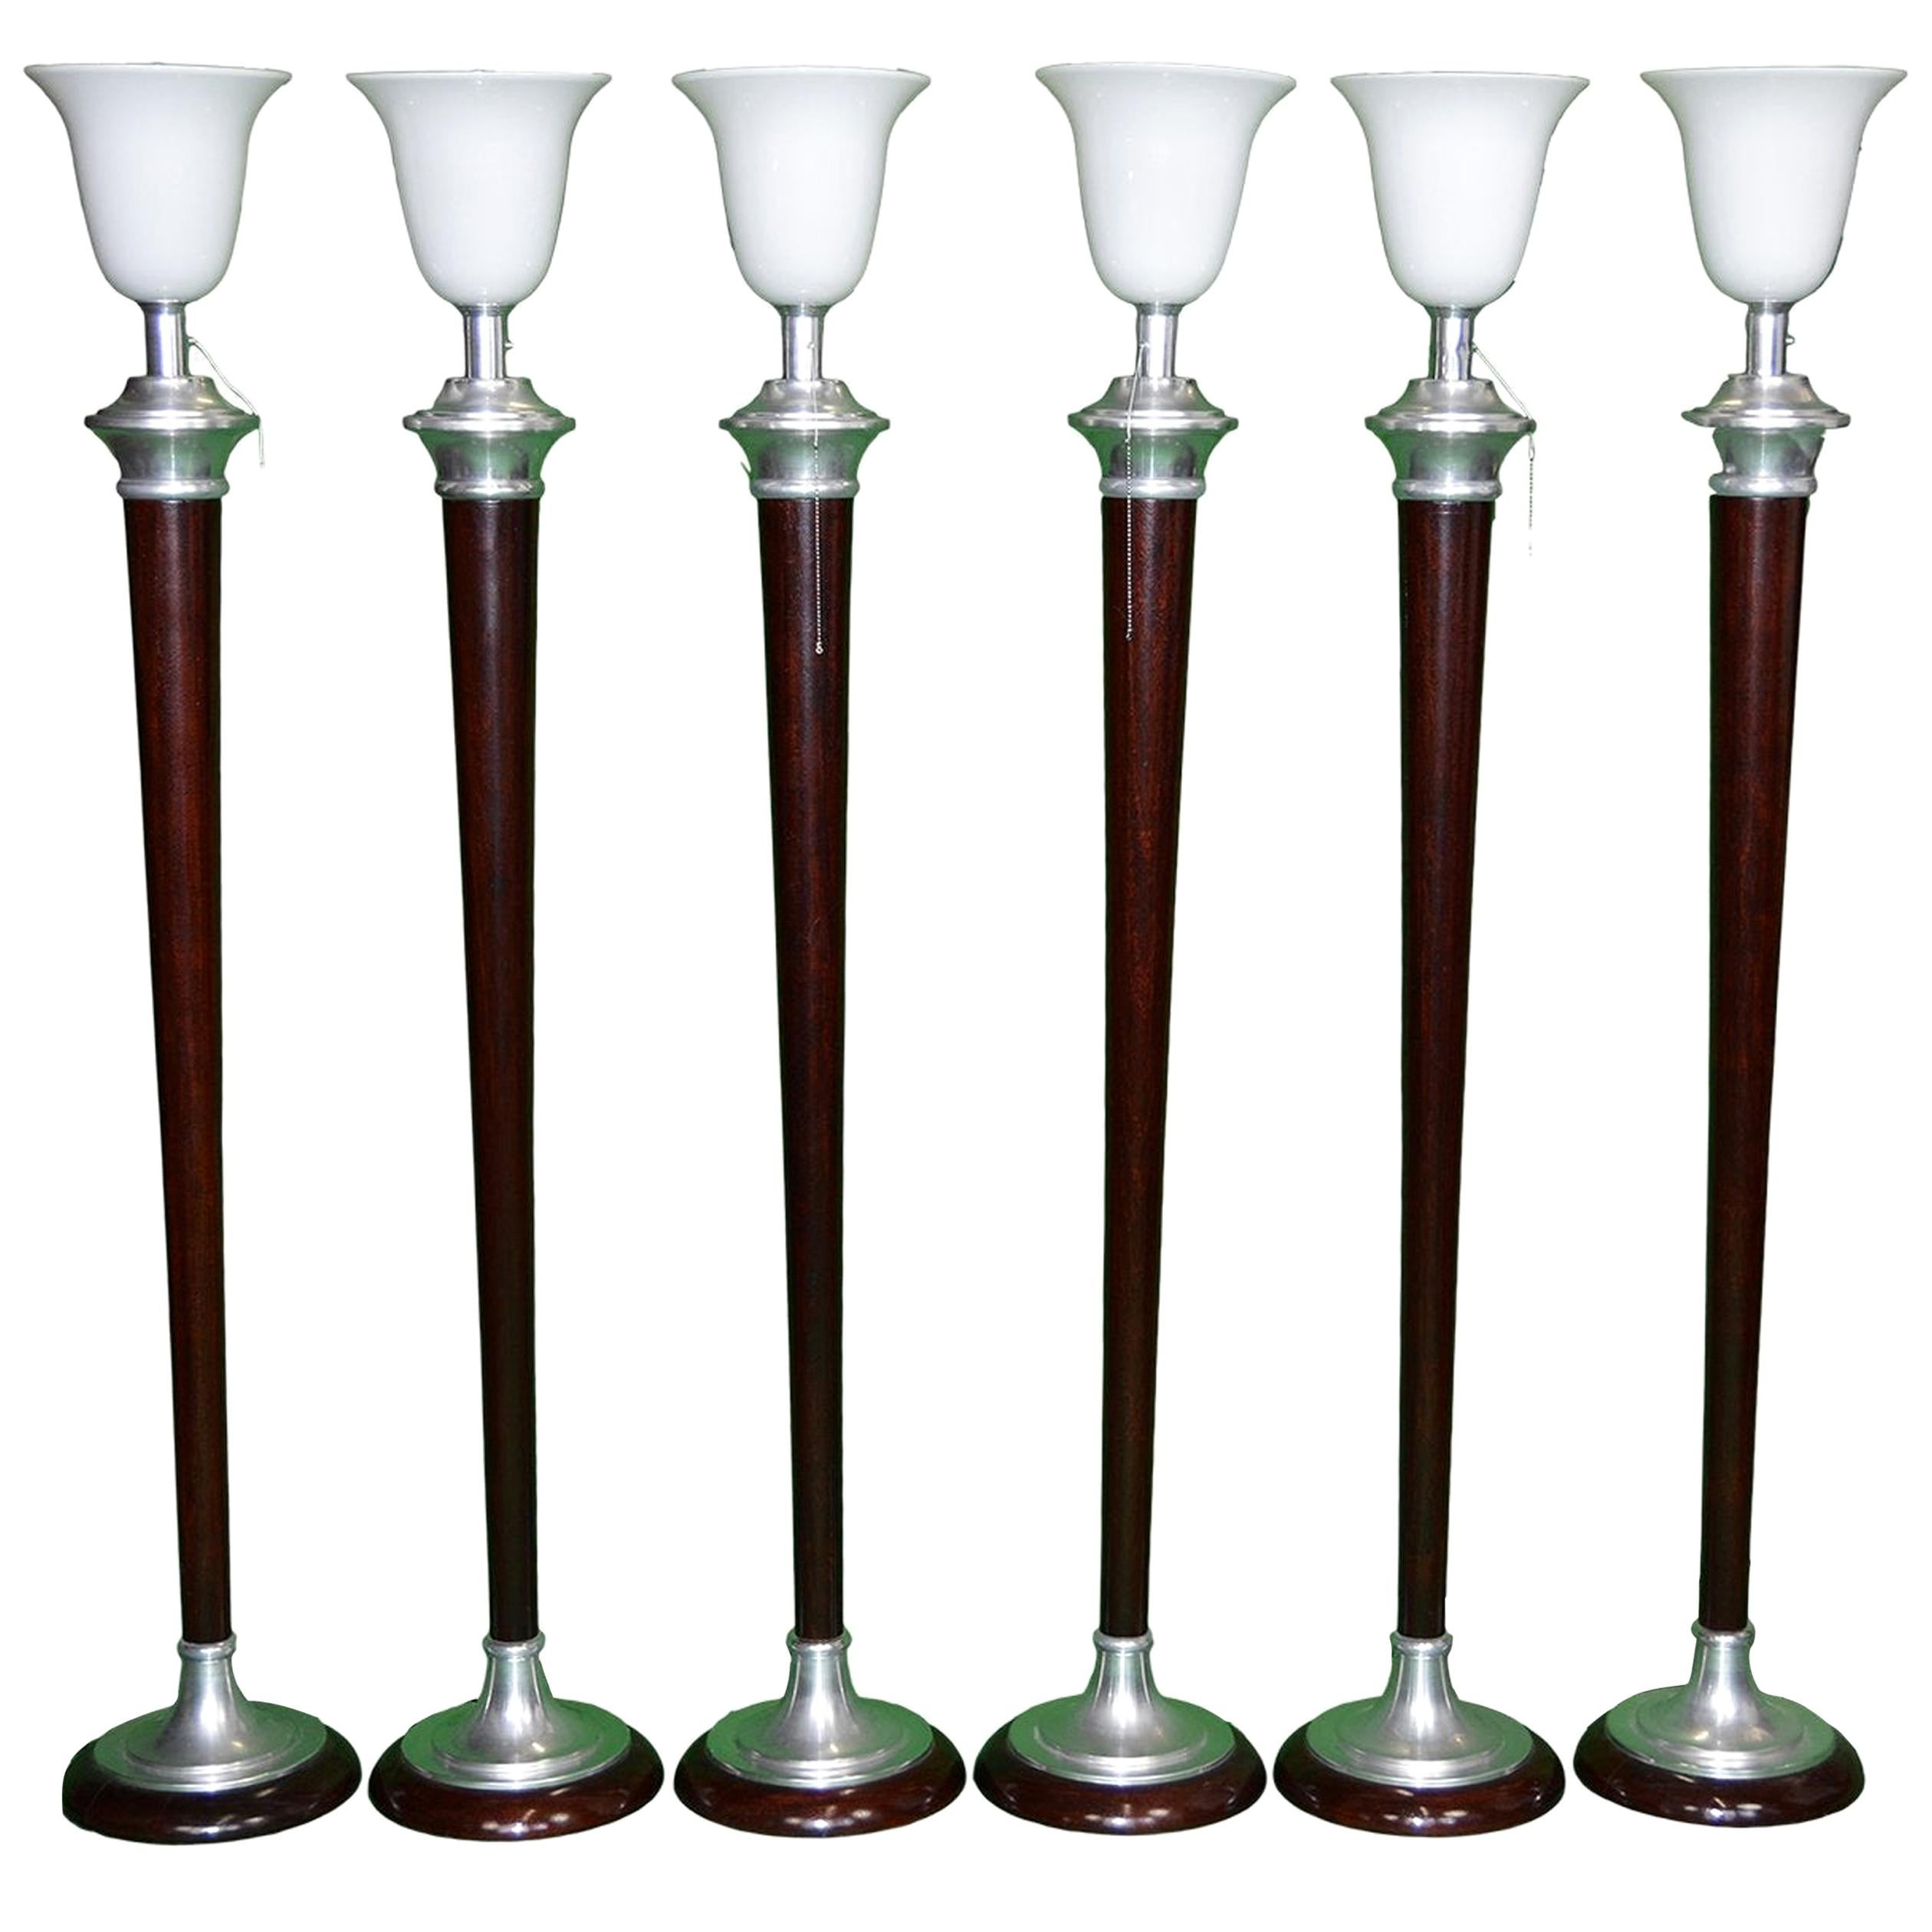 1930 French Art Deco Mazda Floor Lamps Opaline Shade, Set of 6 Torchiere Lamps For Sale